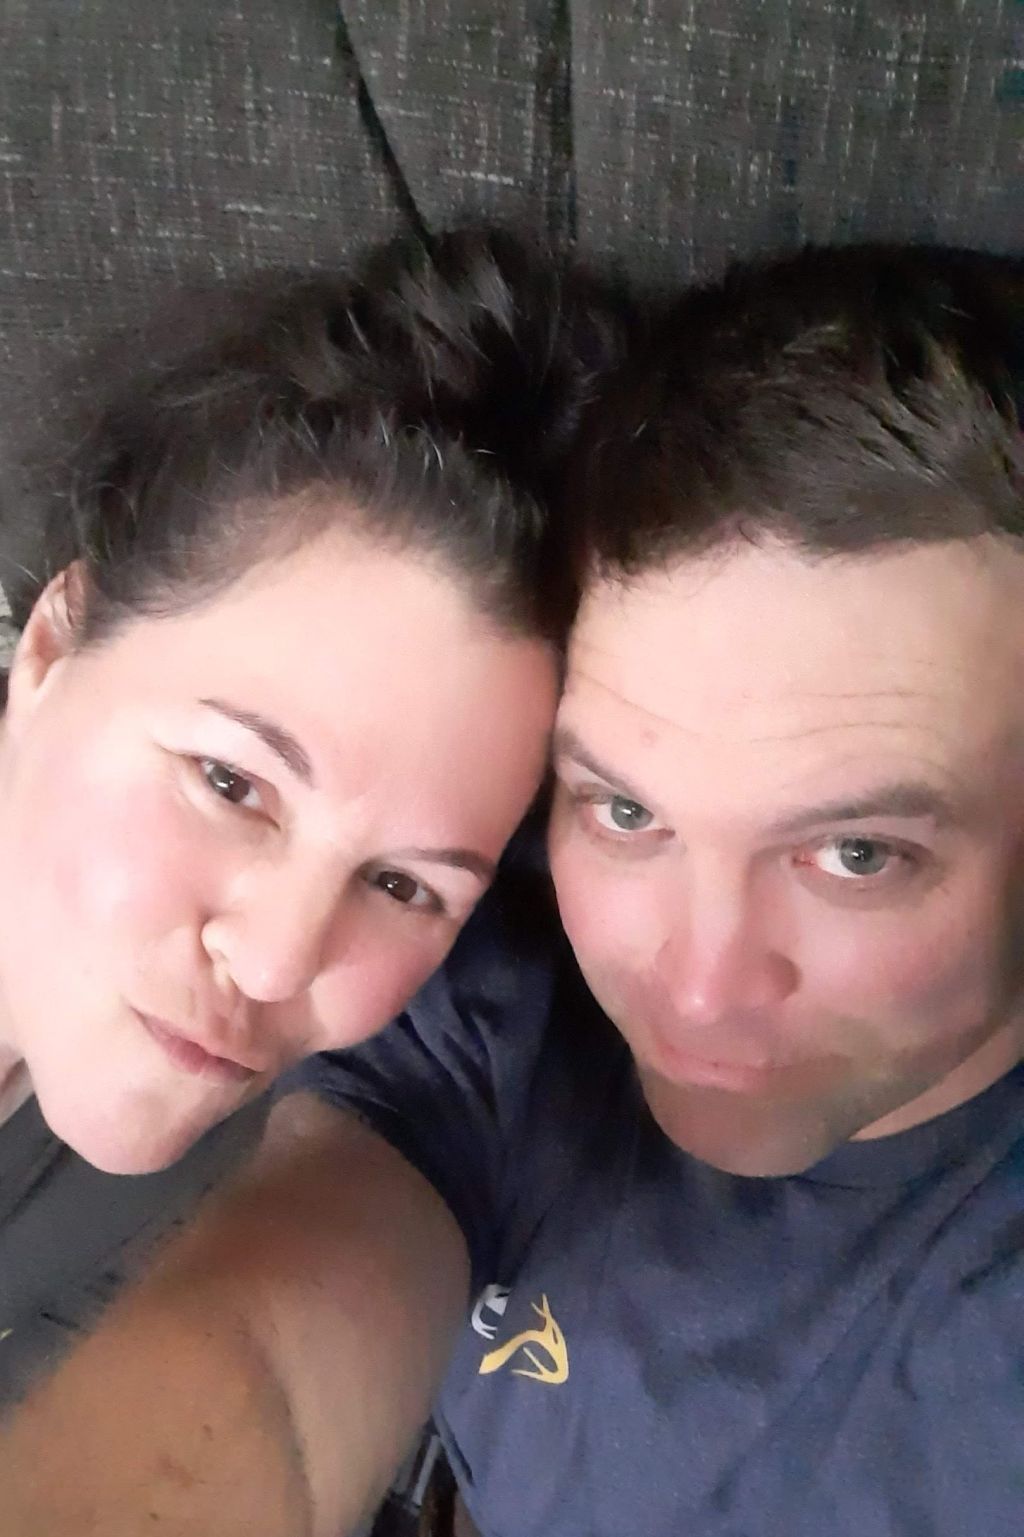 A Christian couple take a selfie to celebrate 15 years of marriage